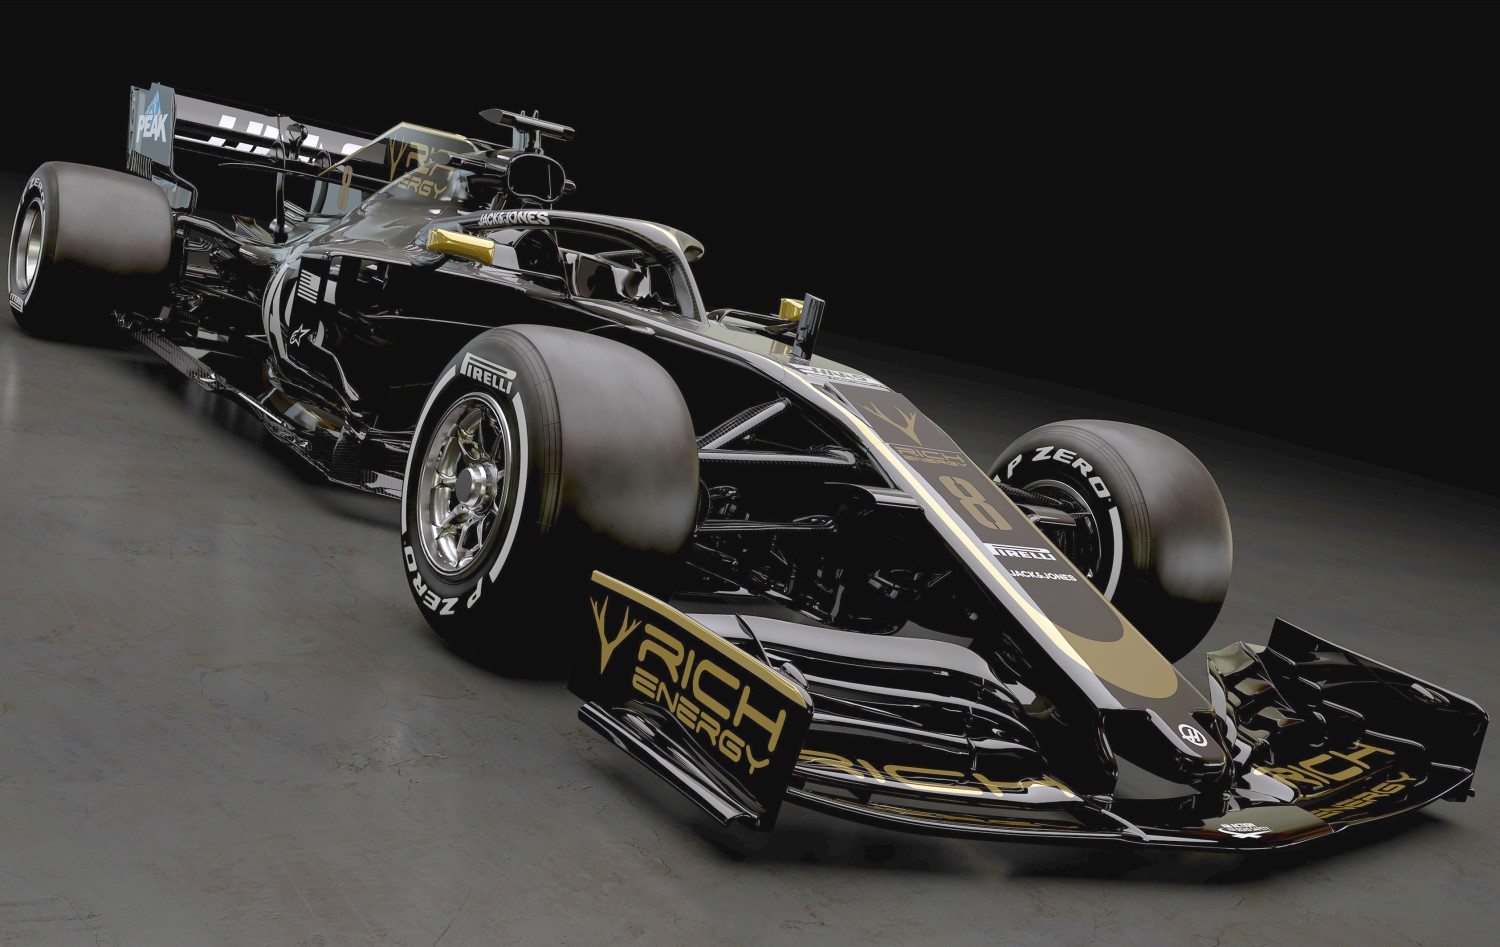 New Haas car sponsored by Rich Energy